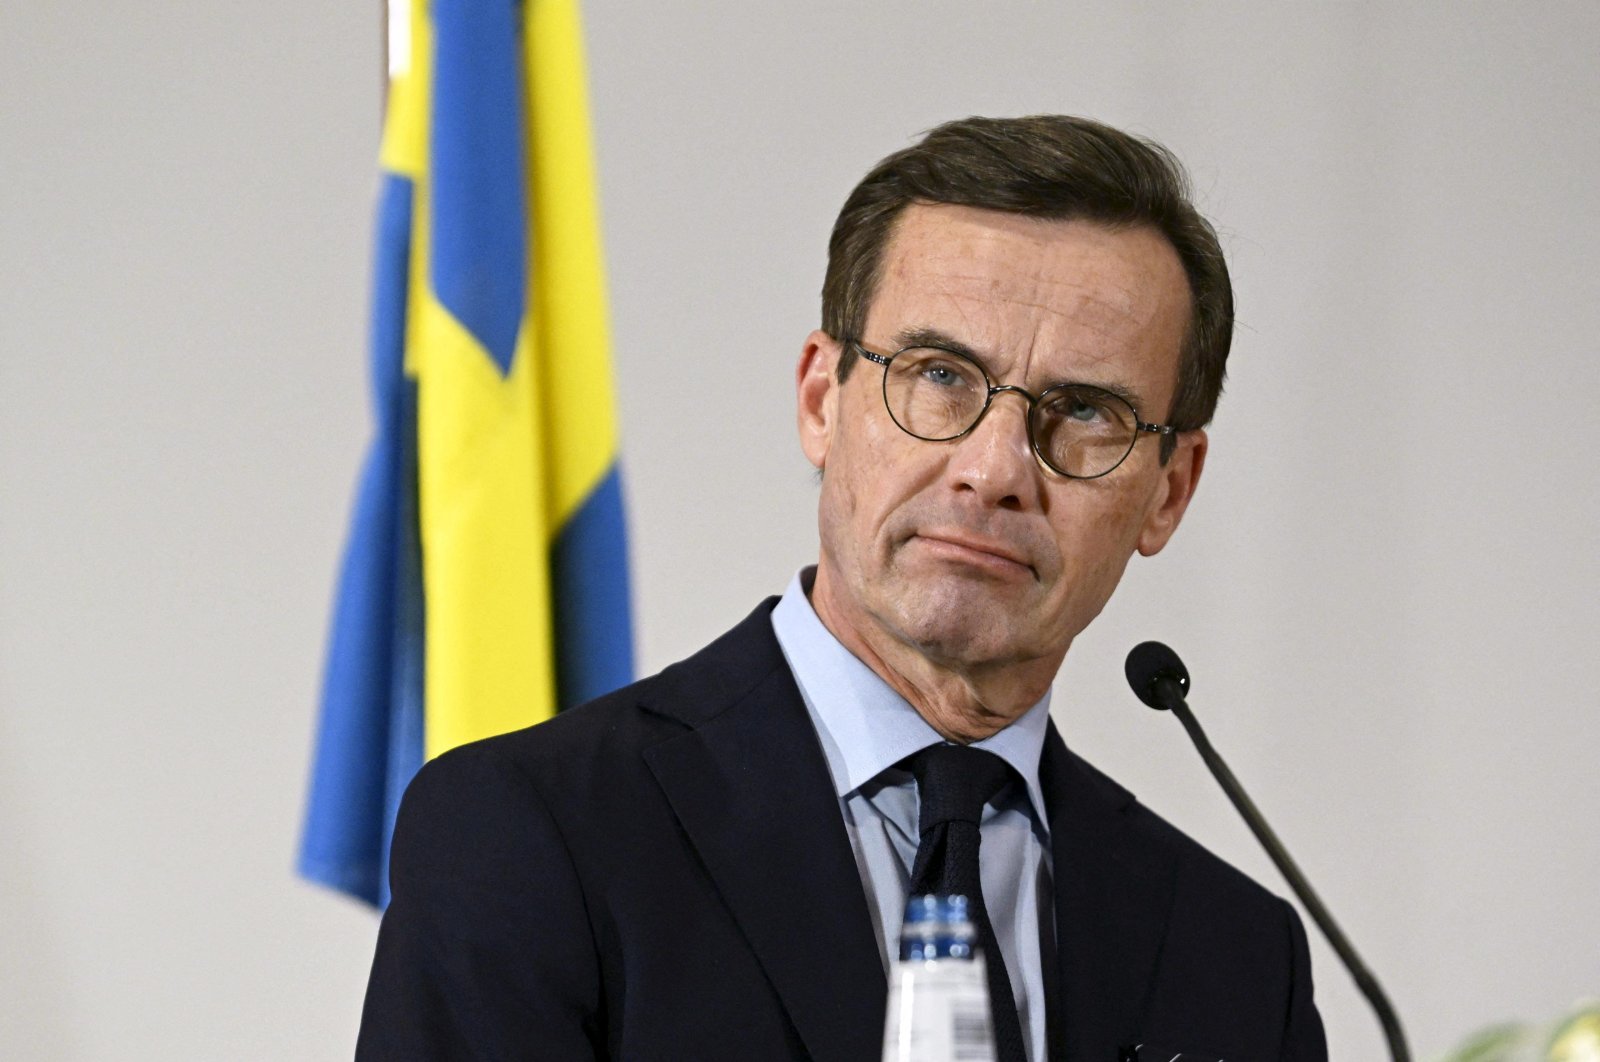 Sweden's Prime Minister Ulf Kristersson attends a press conference